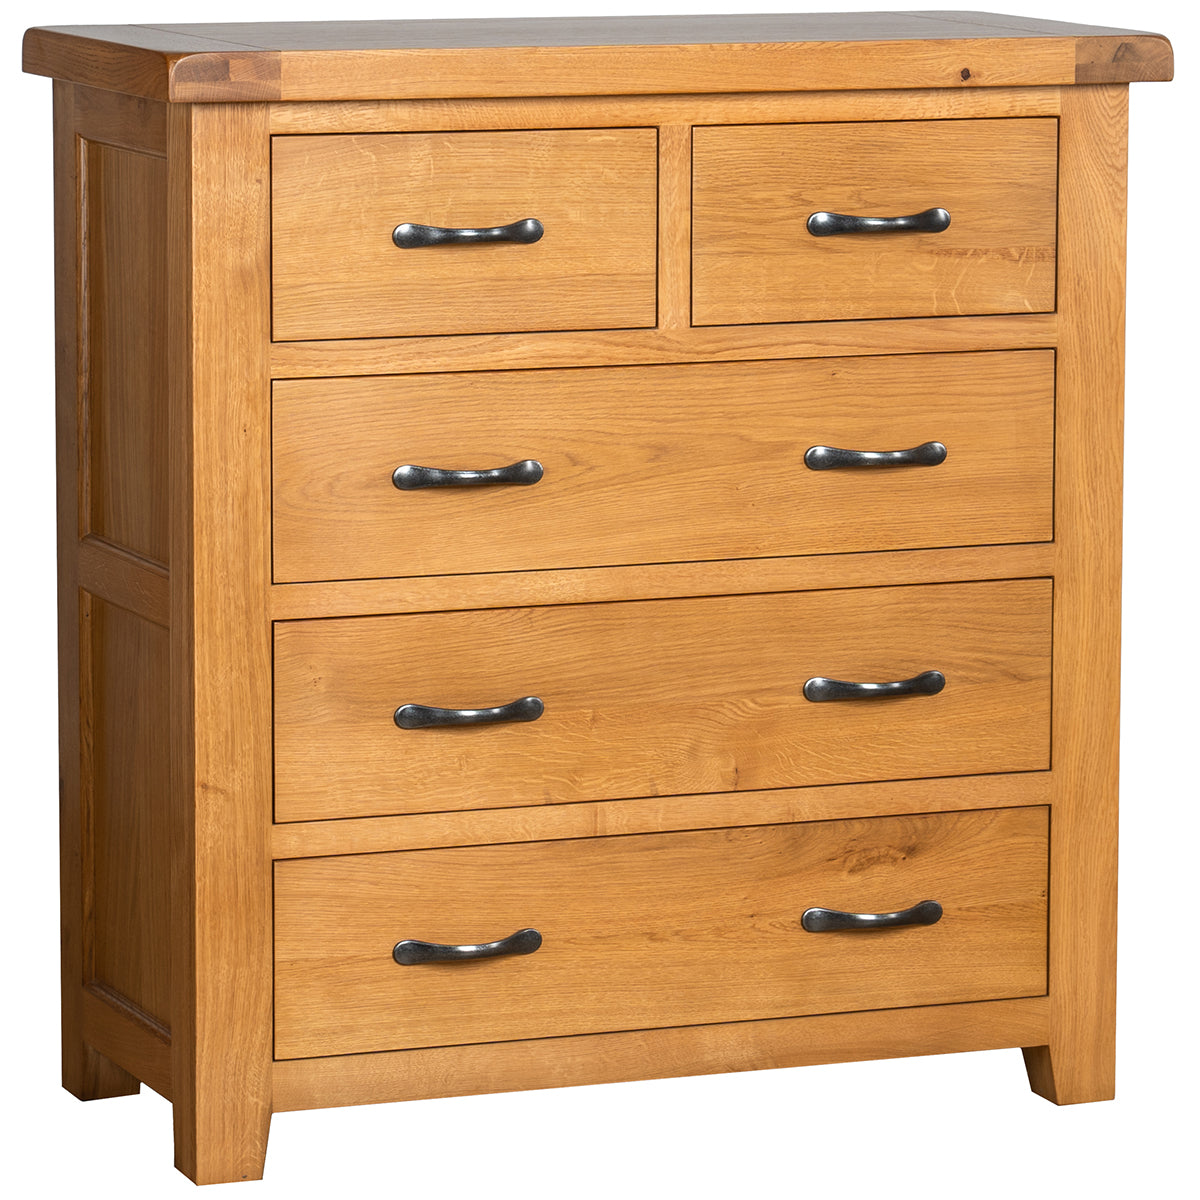 a wooden dresser with a wooden dresser in it 